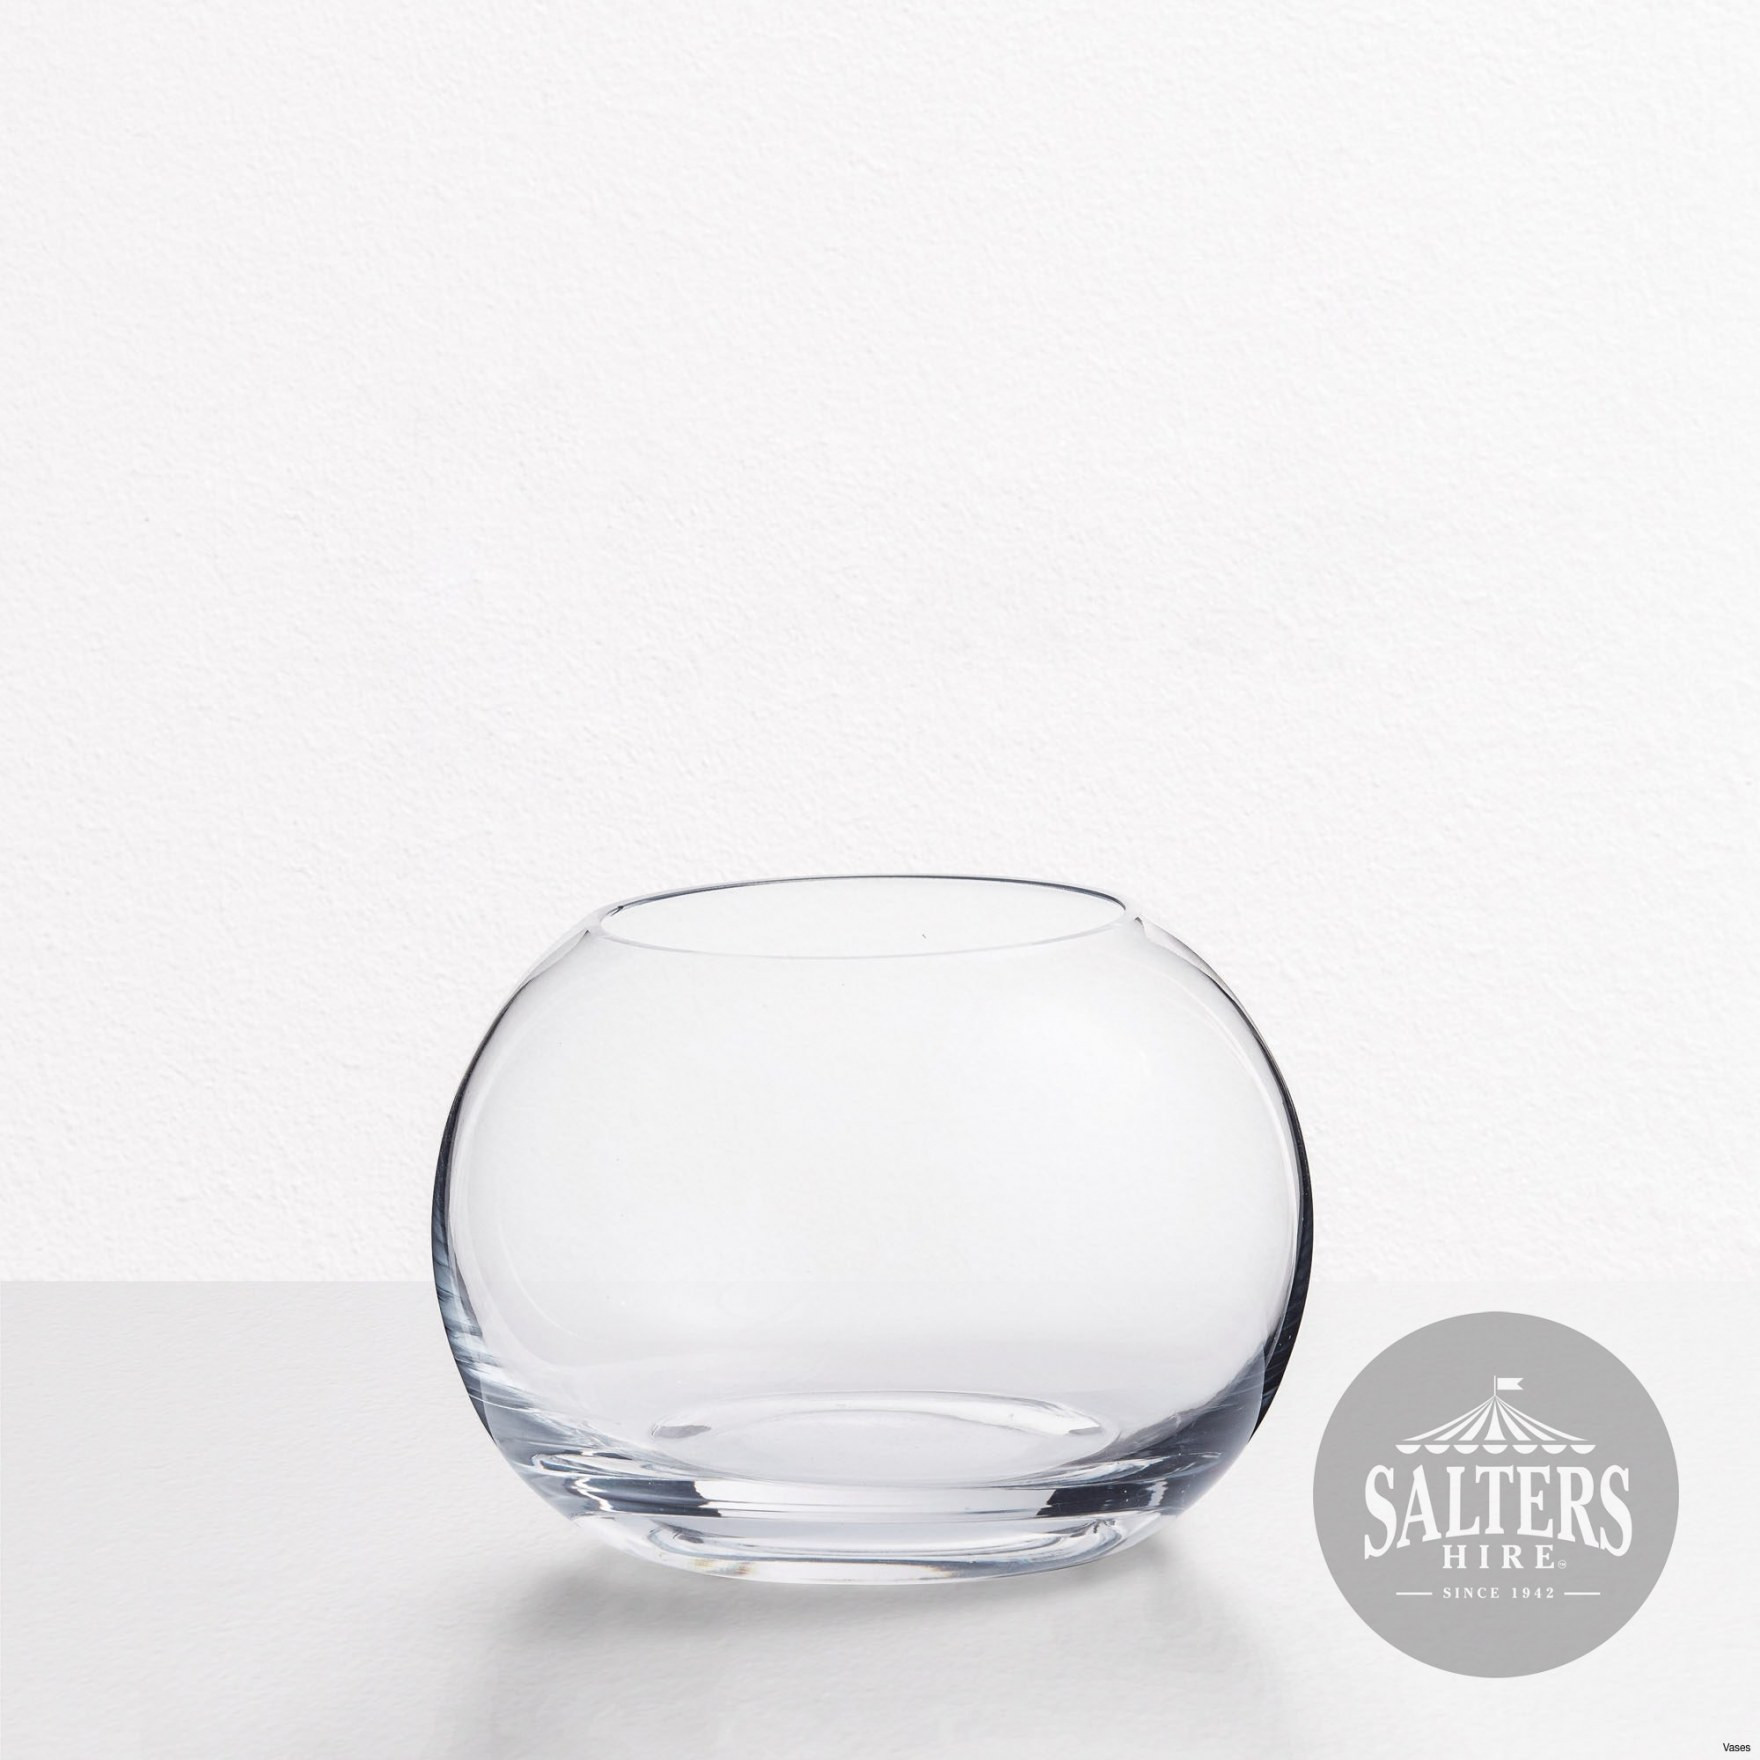 small glass vases wholesale of fish bowls in bulk photograph cool small fish bowls 50 imgf h vases pertaining to fish bowls in bulk photograph cool small fish bowls 50 imgf h vases small fish bowl